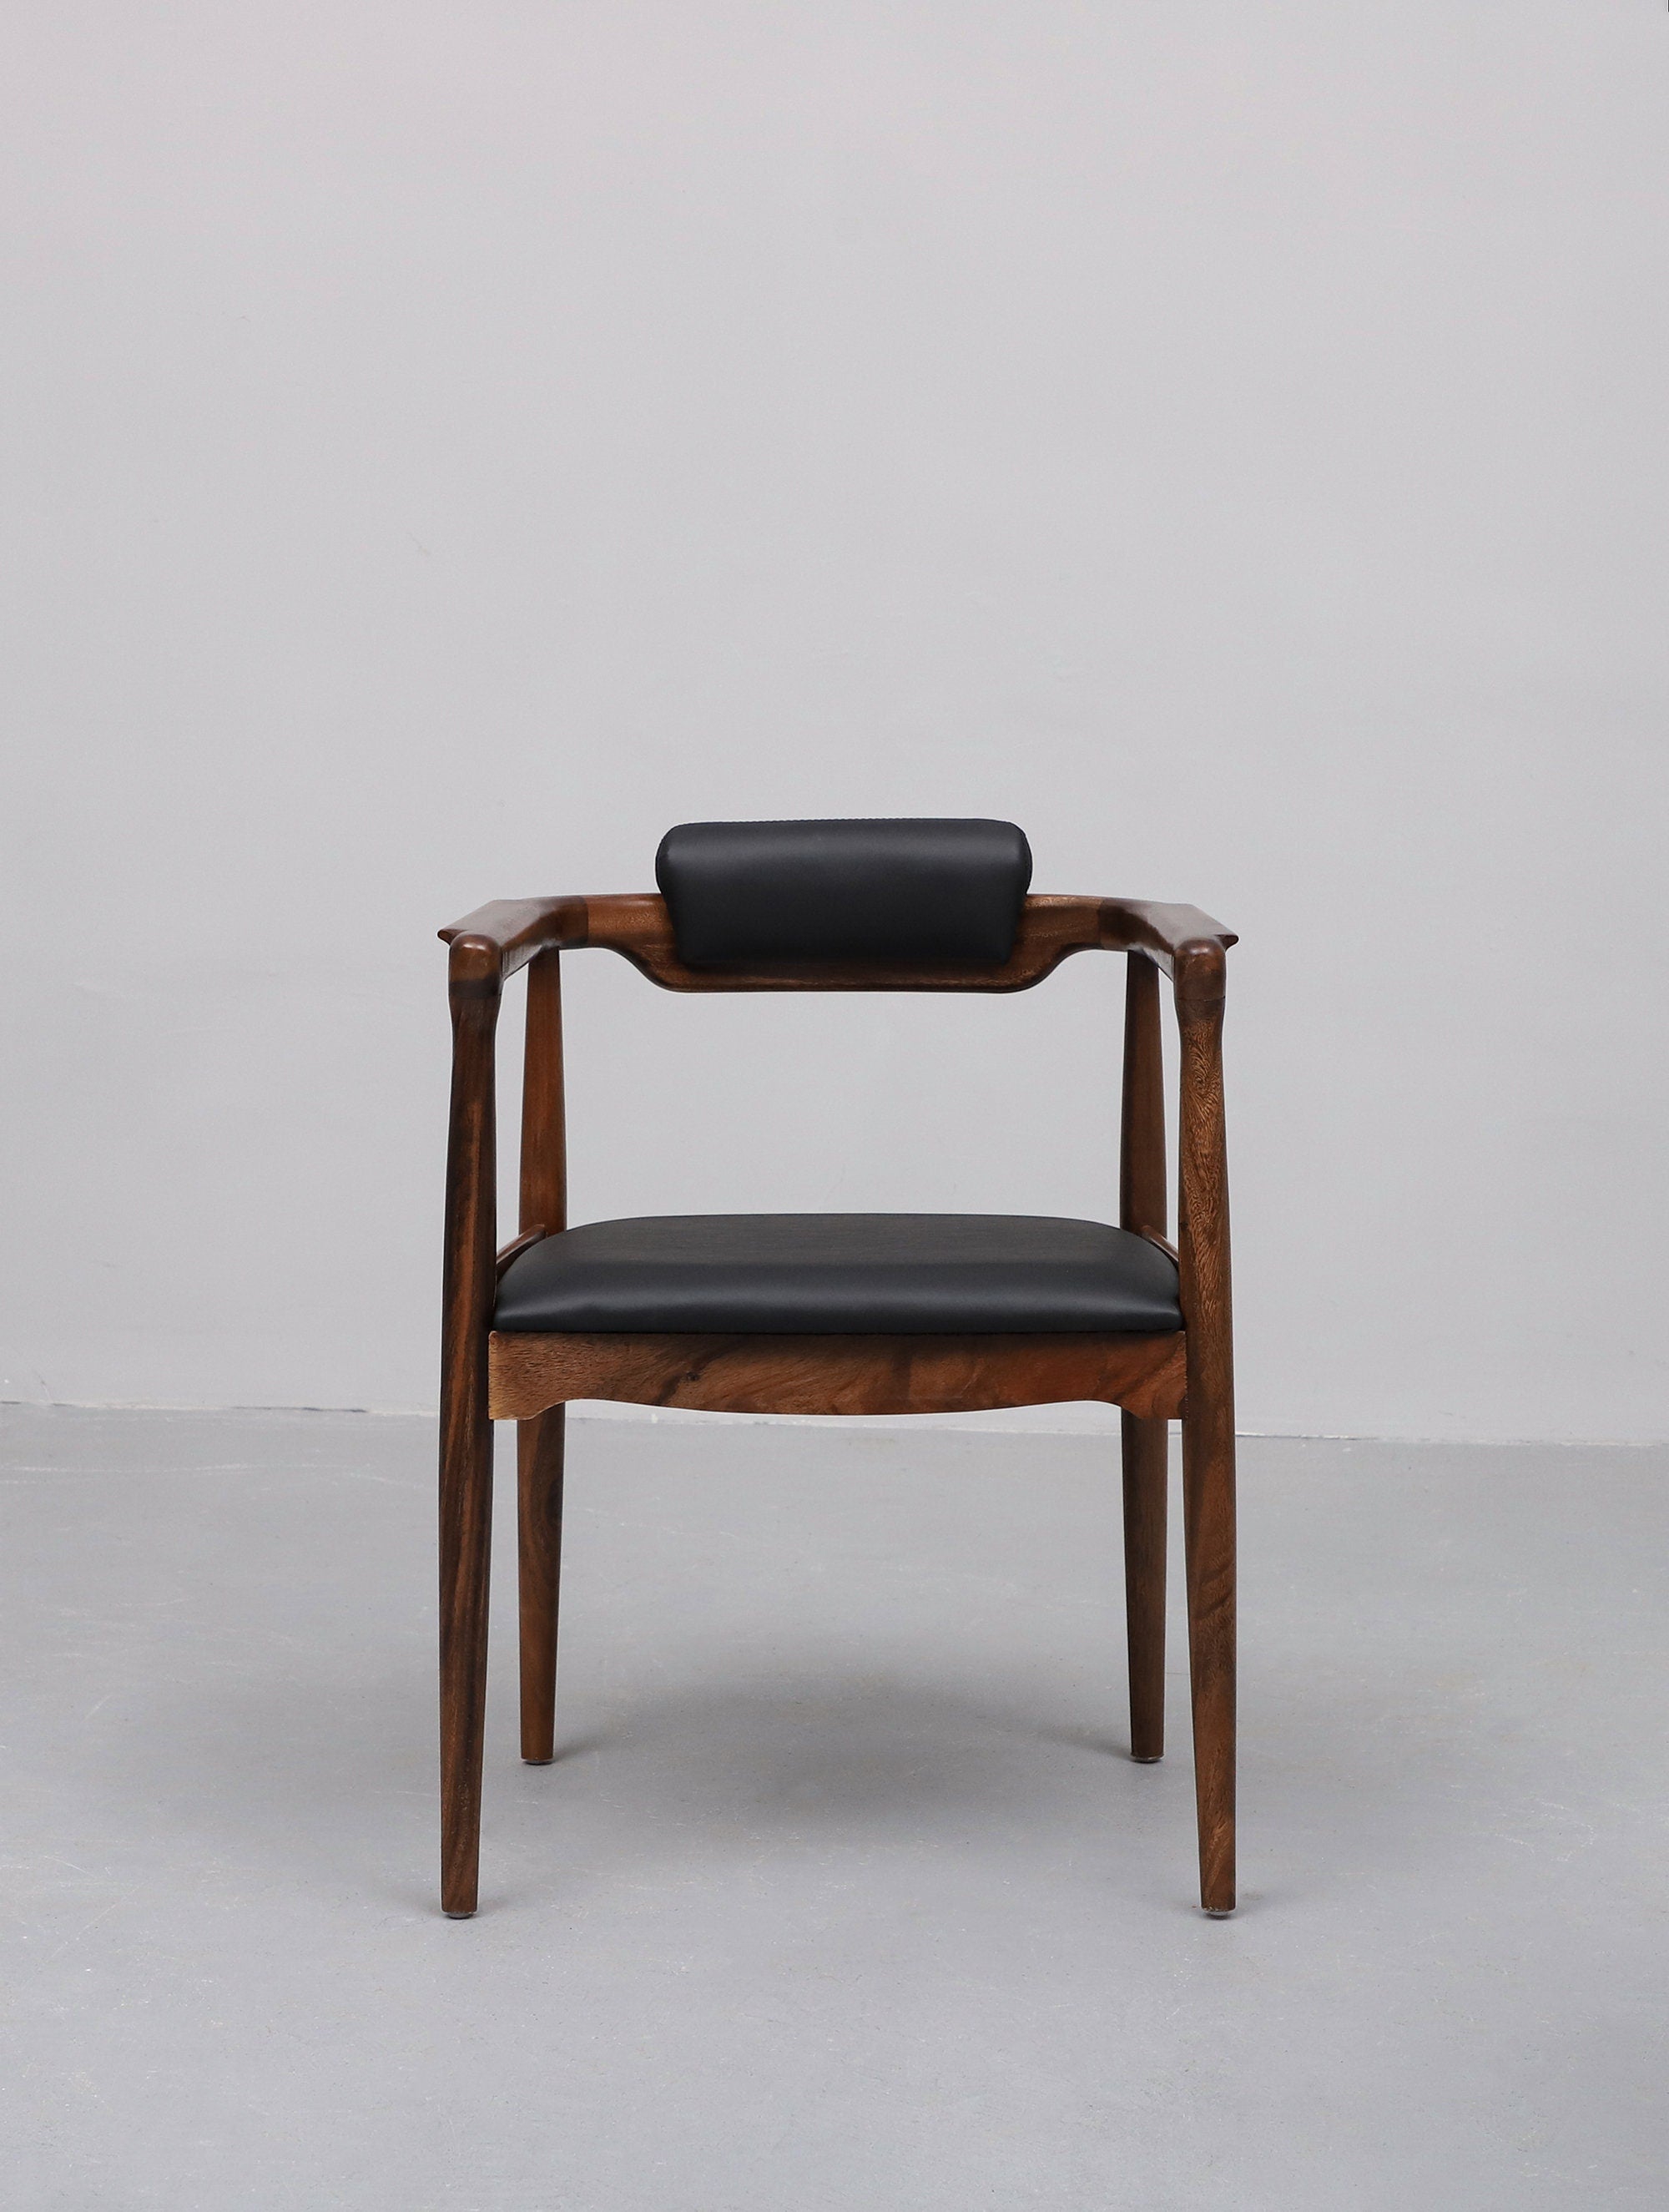 black leather chair, Fabric Padded Chair, walnut chair, leather,high quality wood